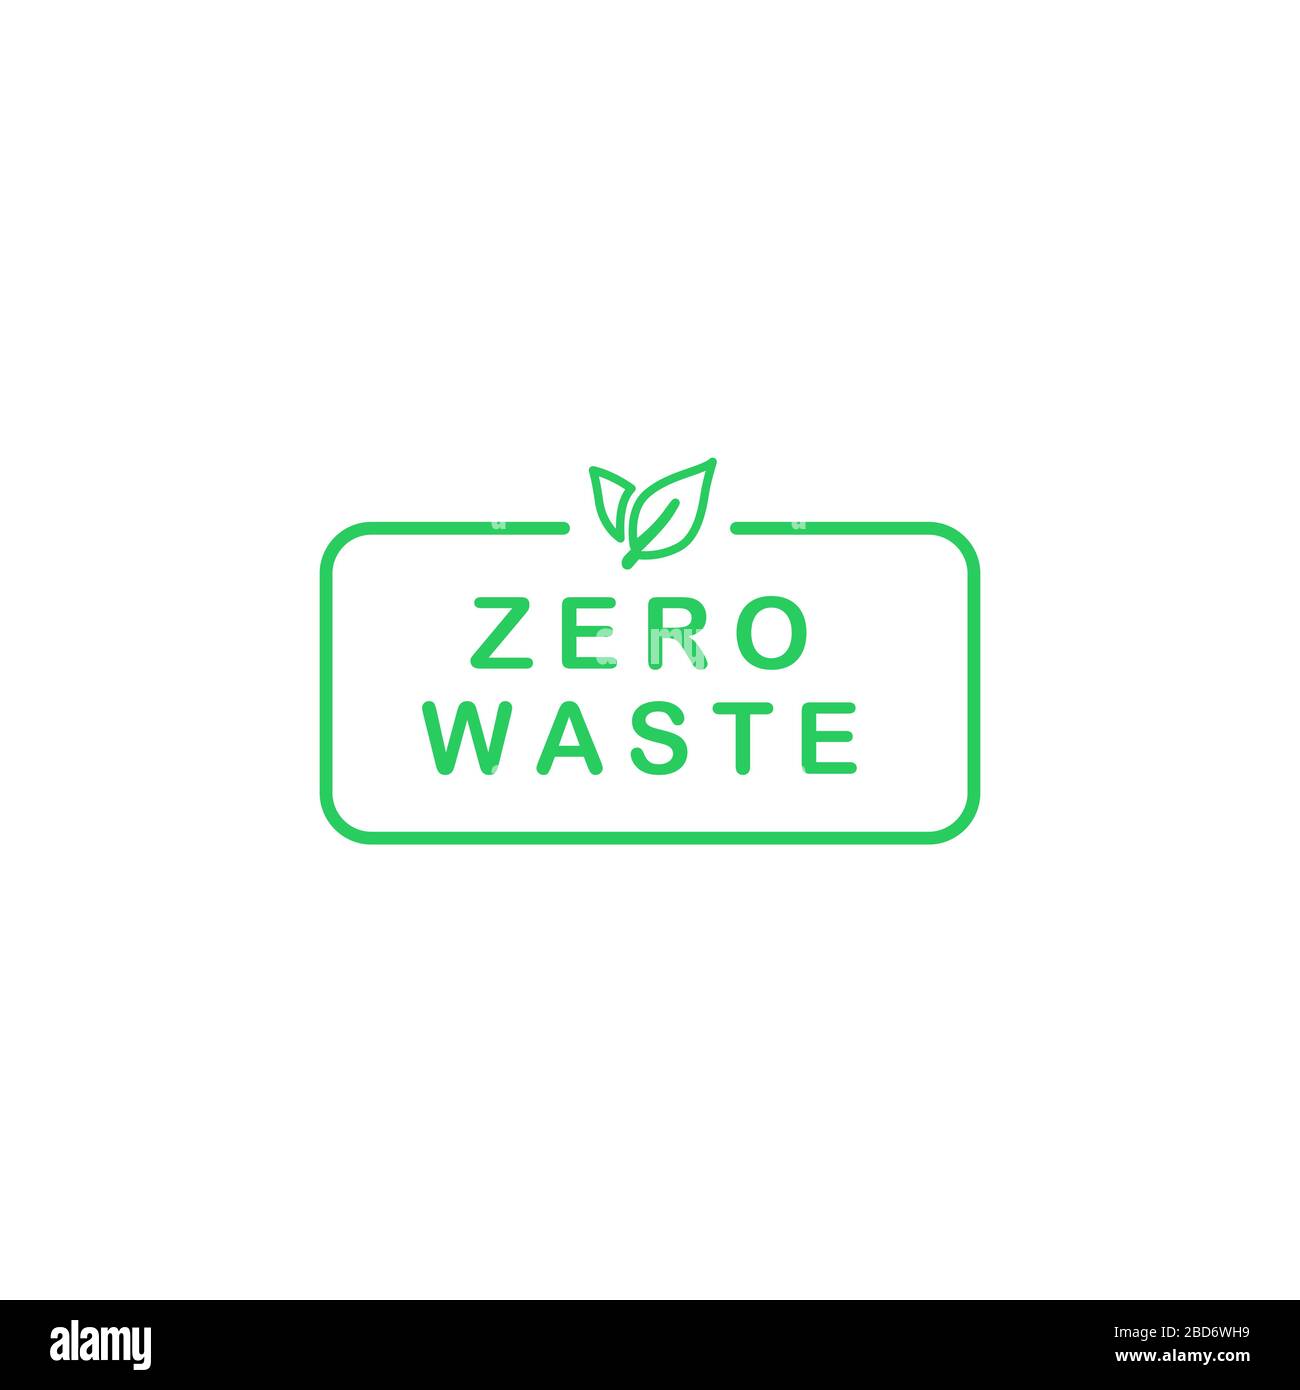 Zero waste text in rectangle with green line leaves. Eco label, green emblem. Vector stock illustration. Stock Vector